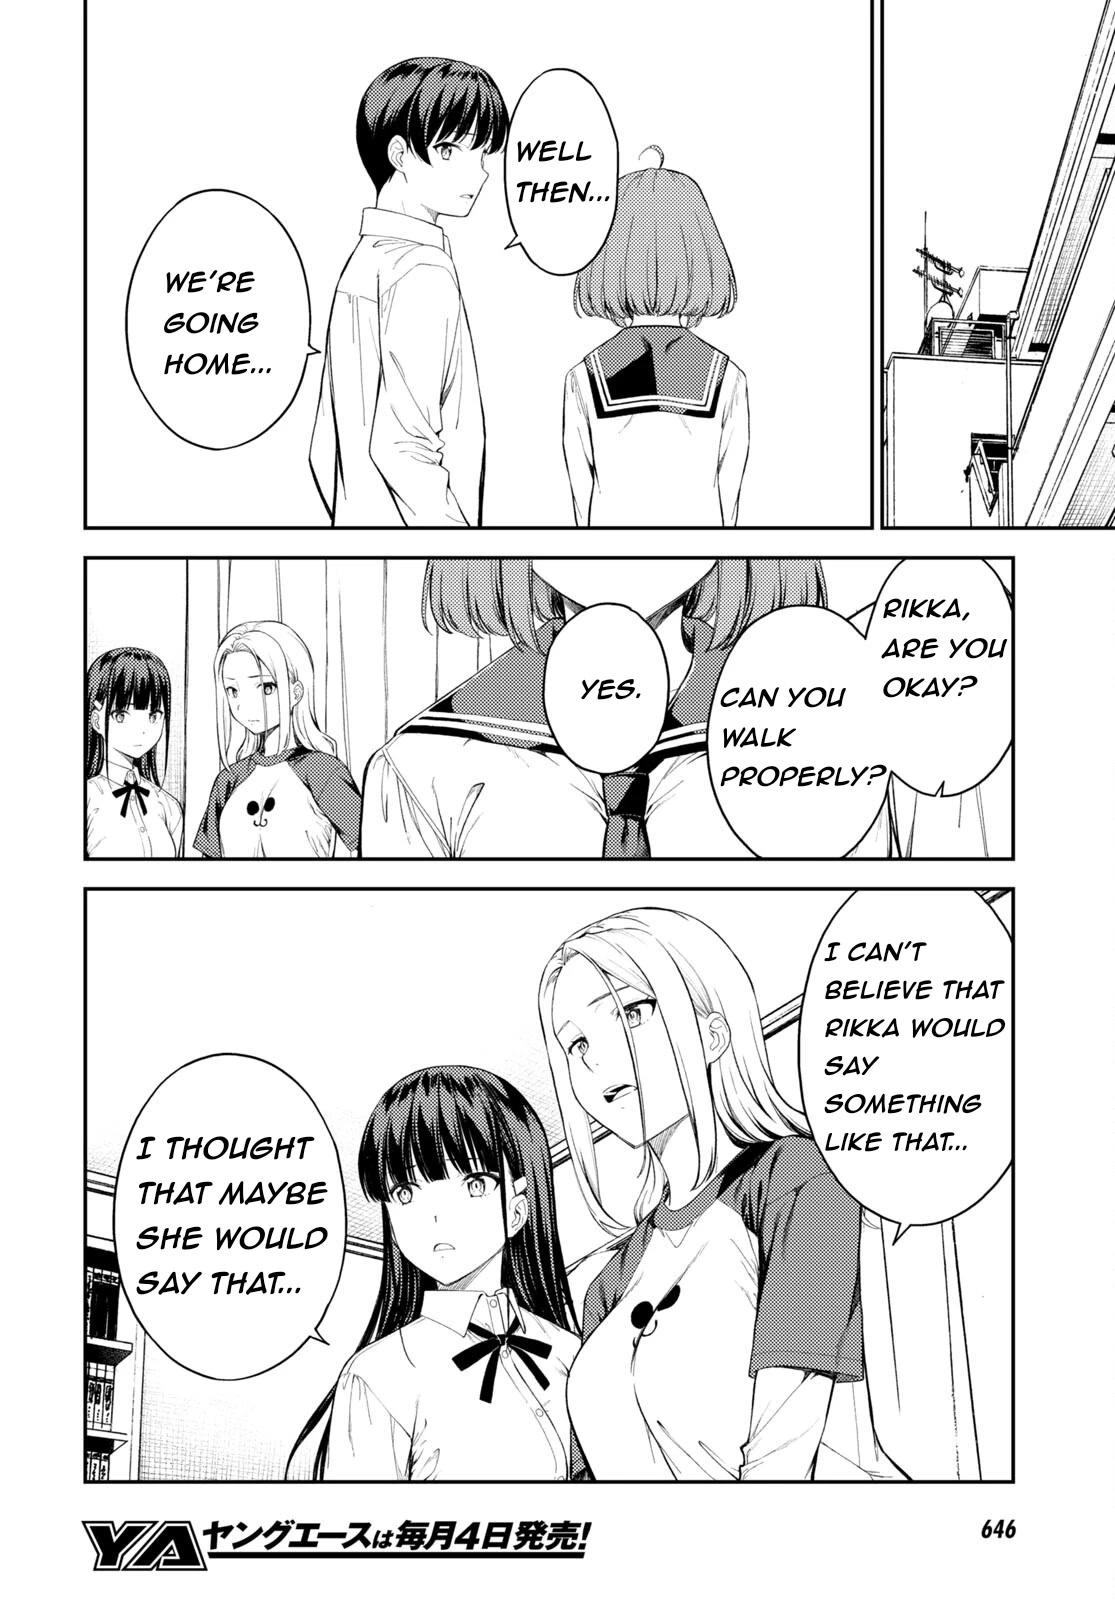 The Quintessential Quintuplets, Chapter 48 - The Quintessential Quintuplets  Manga Online